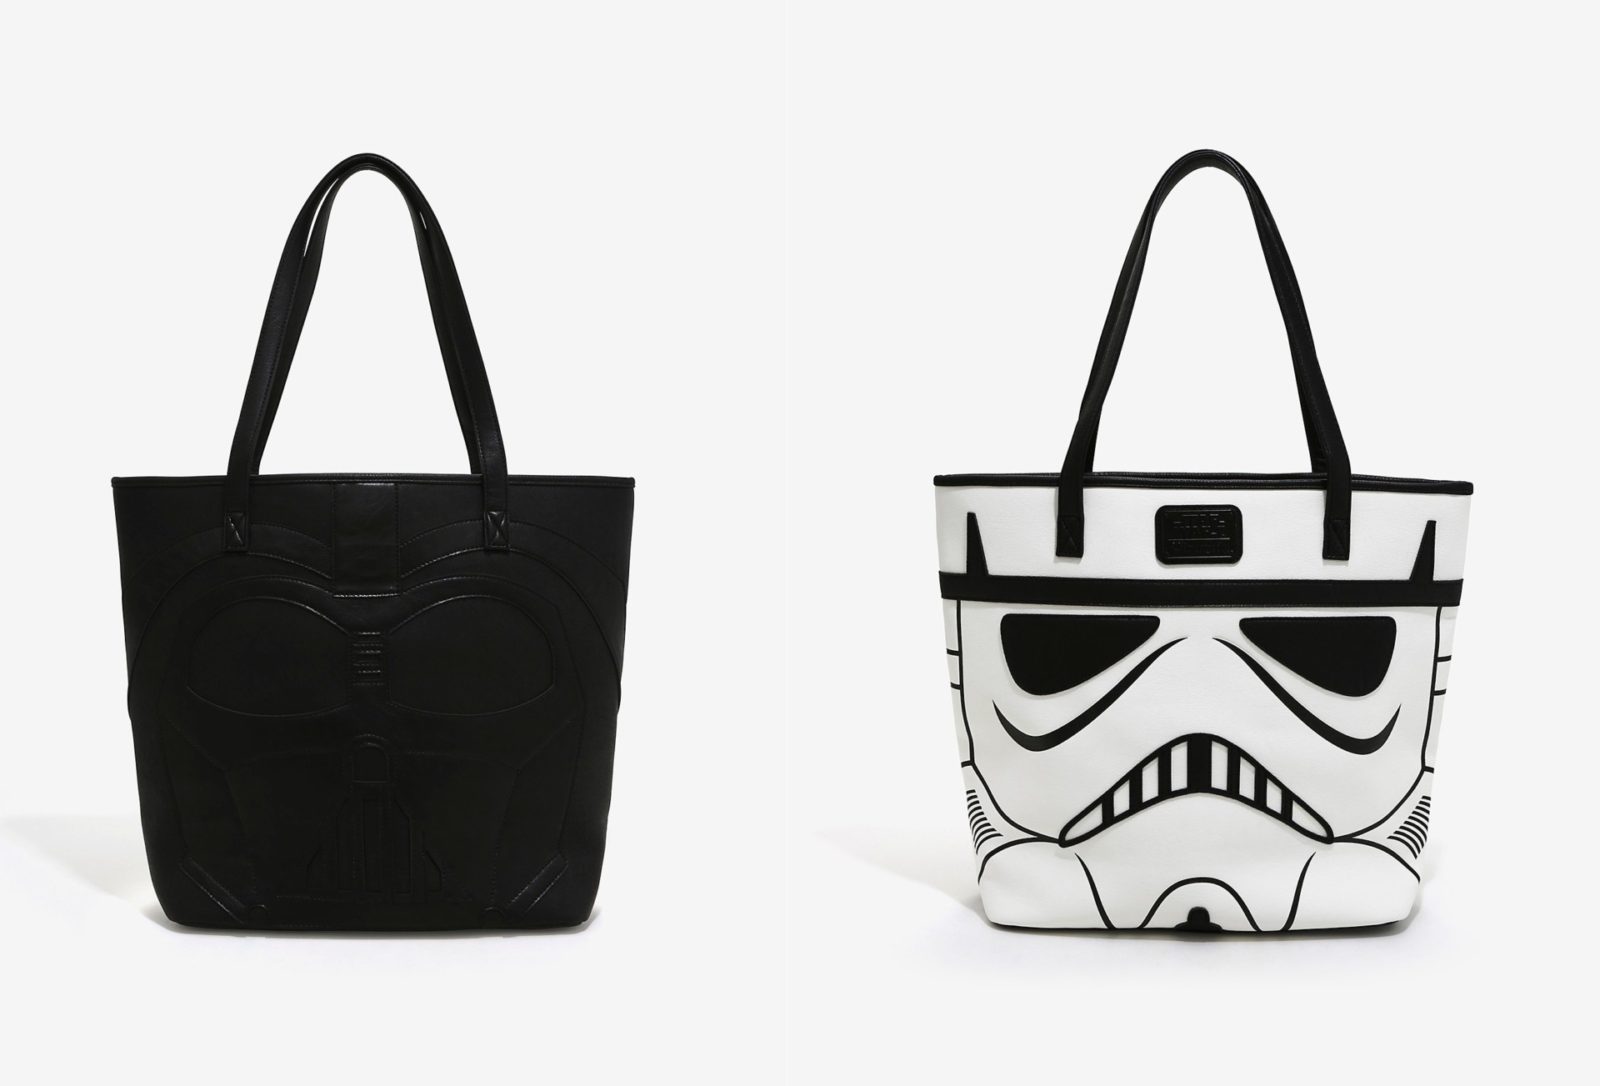 New 2-sided Loungefly x Star Wars tote